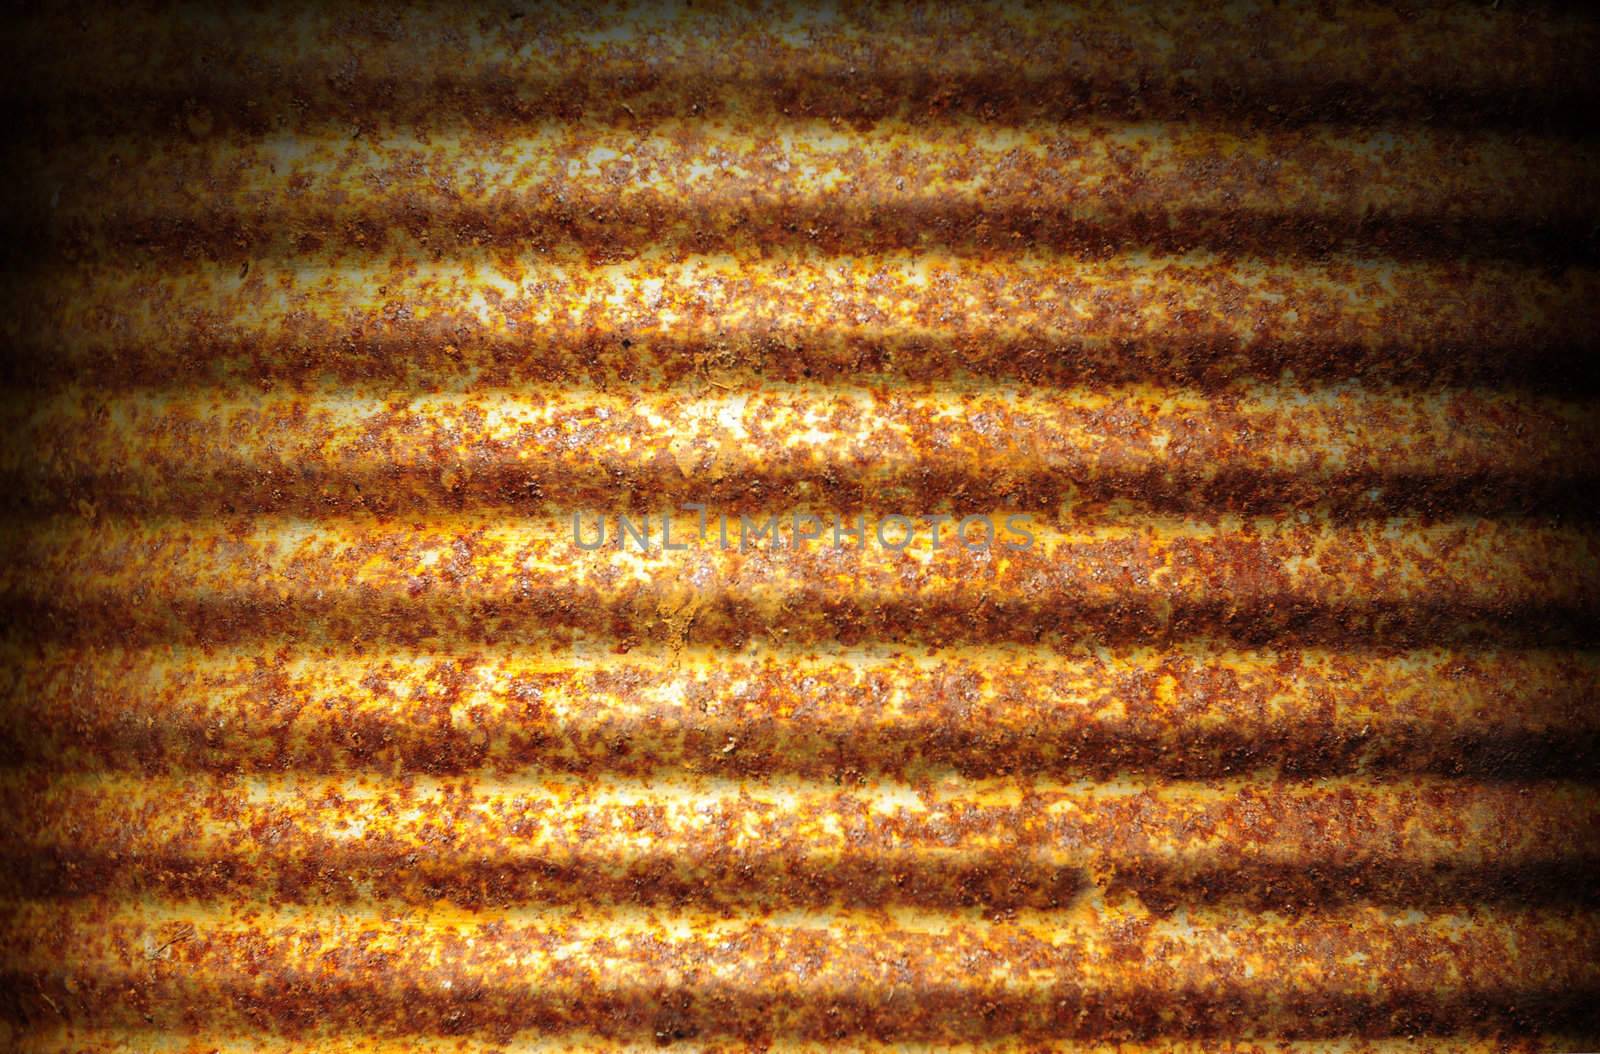 Rusty corrugated metal can surface lit dramatically from above